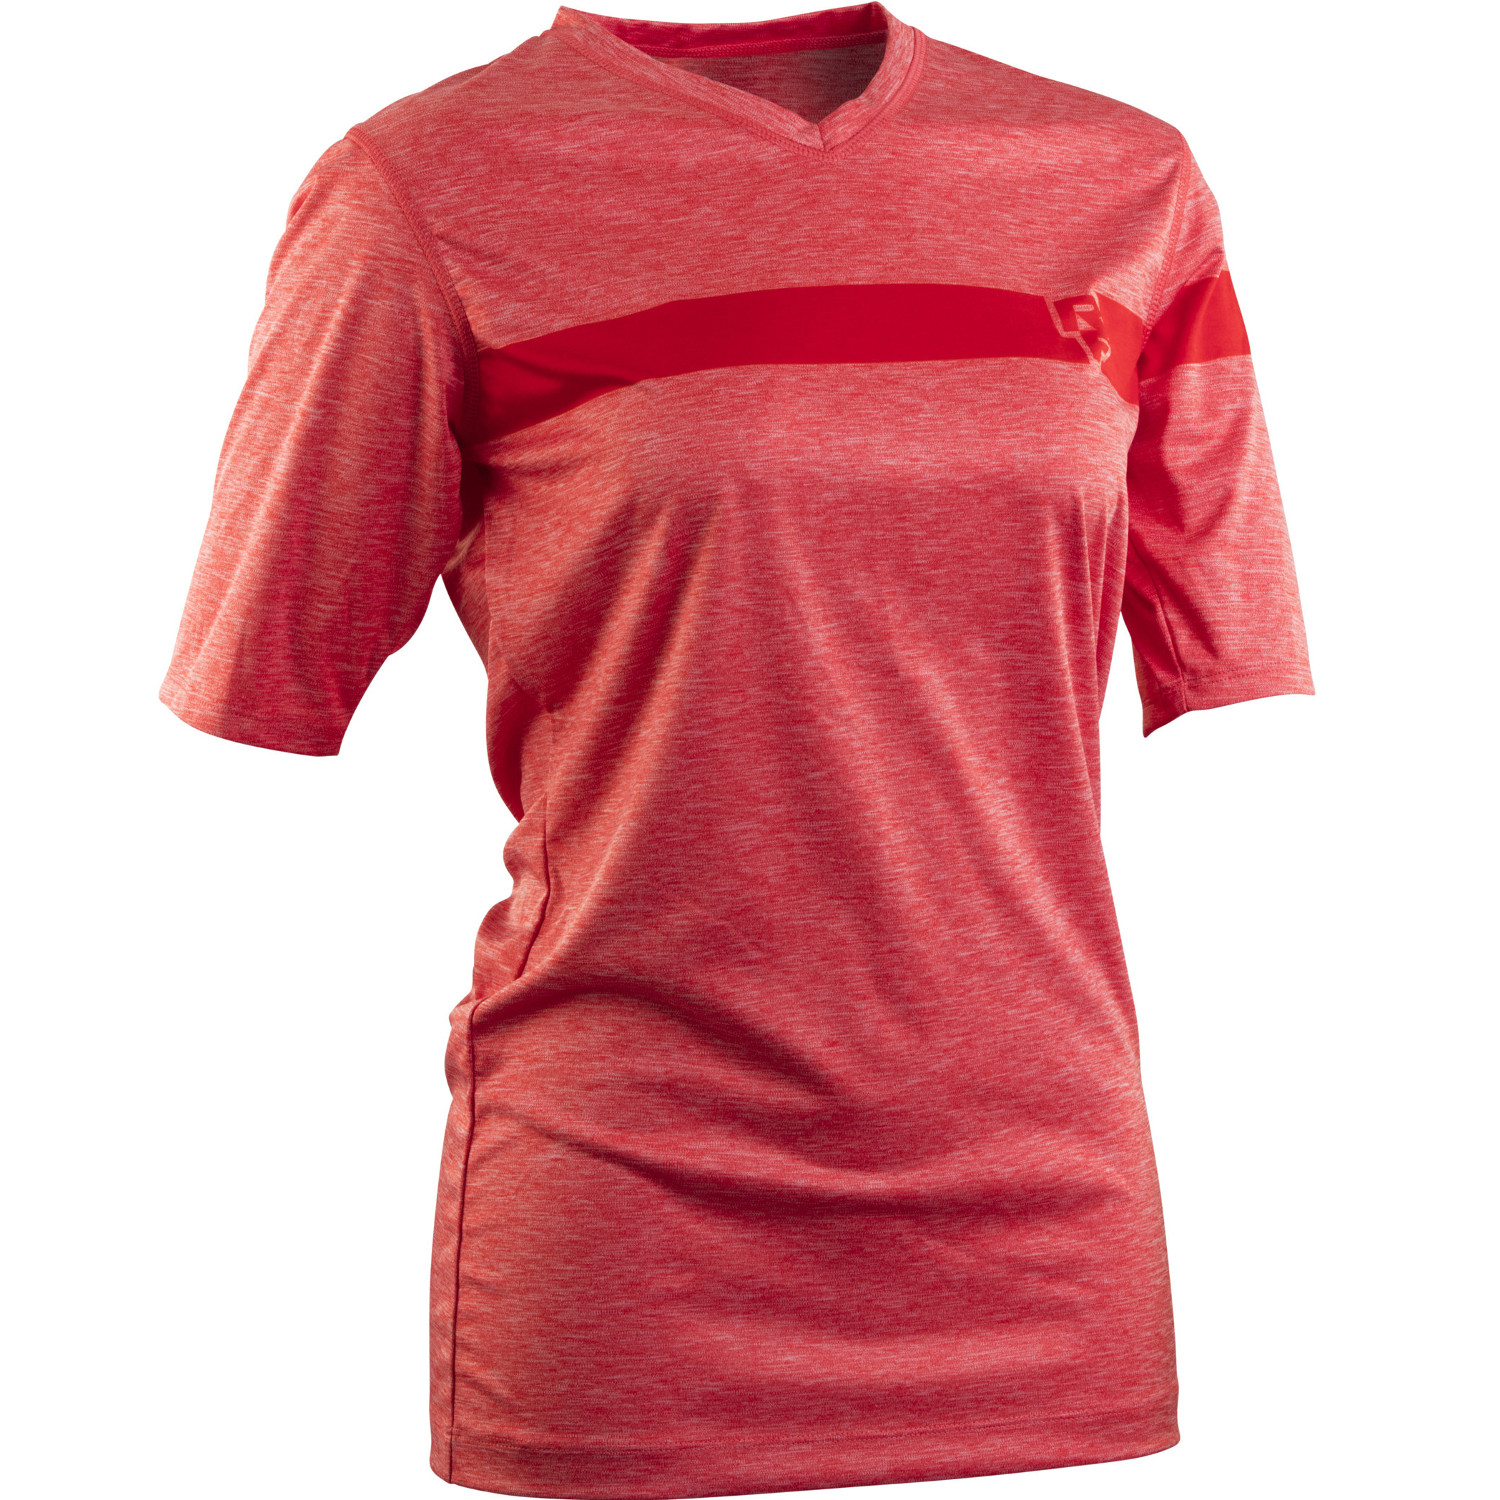 Race Face Girls All Mountain Jersey Short Sleeve Charlie Flame